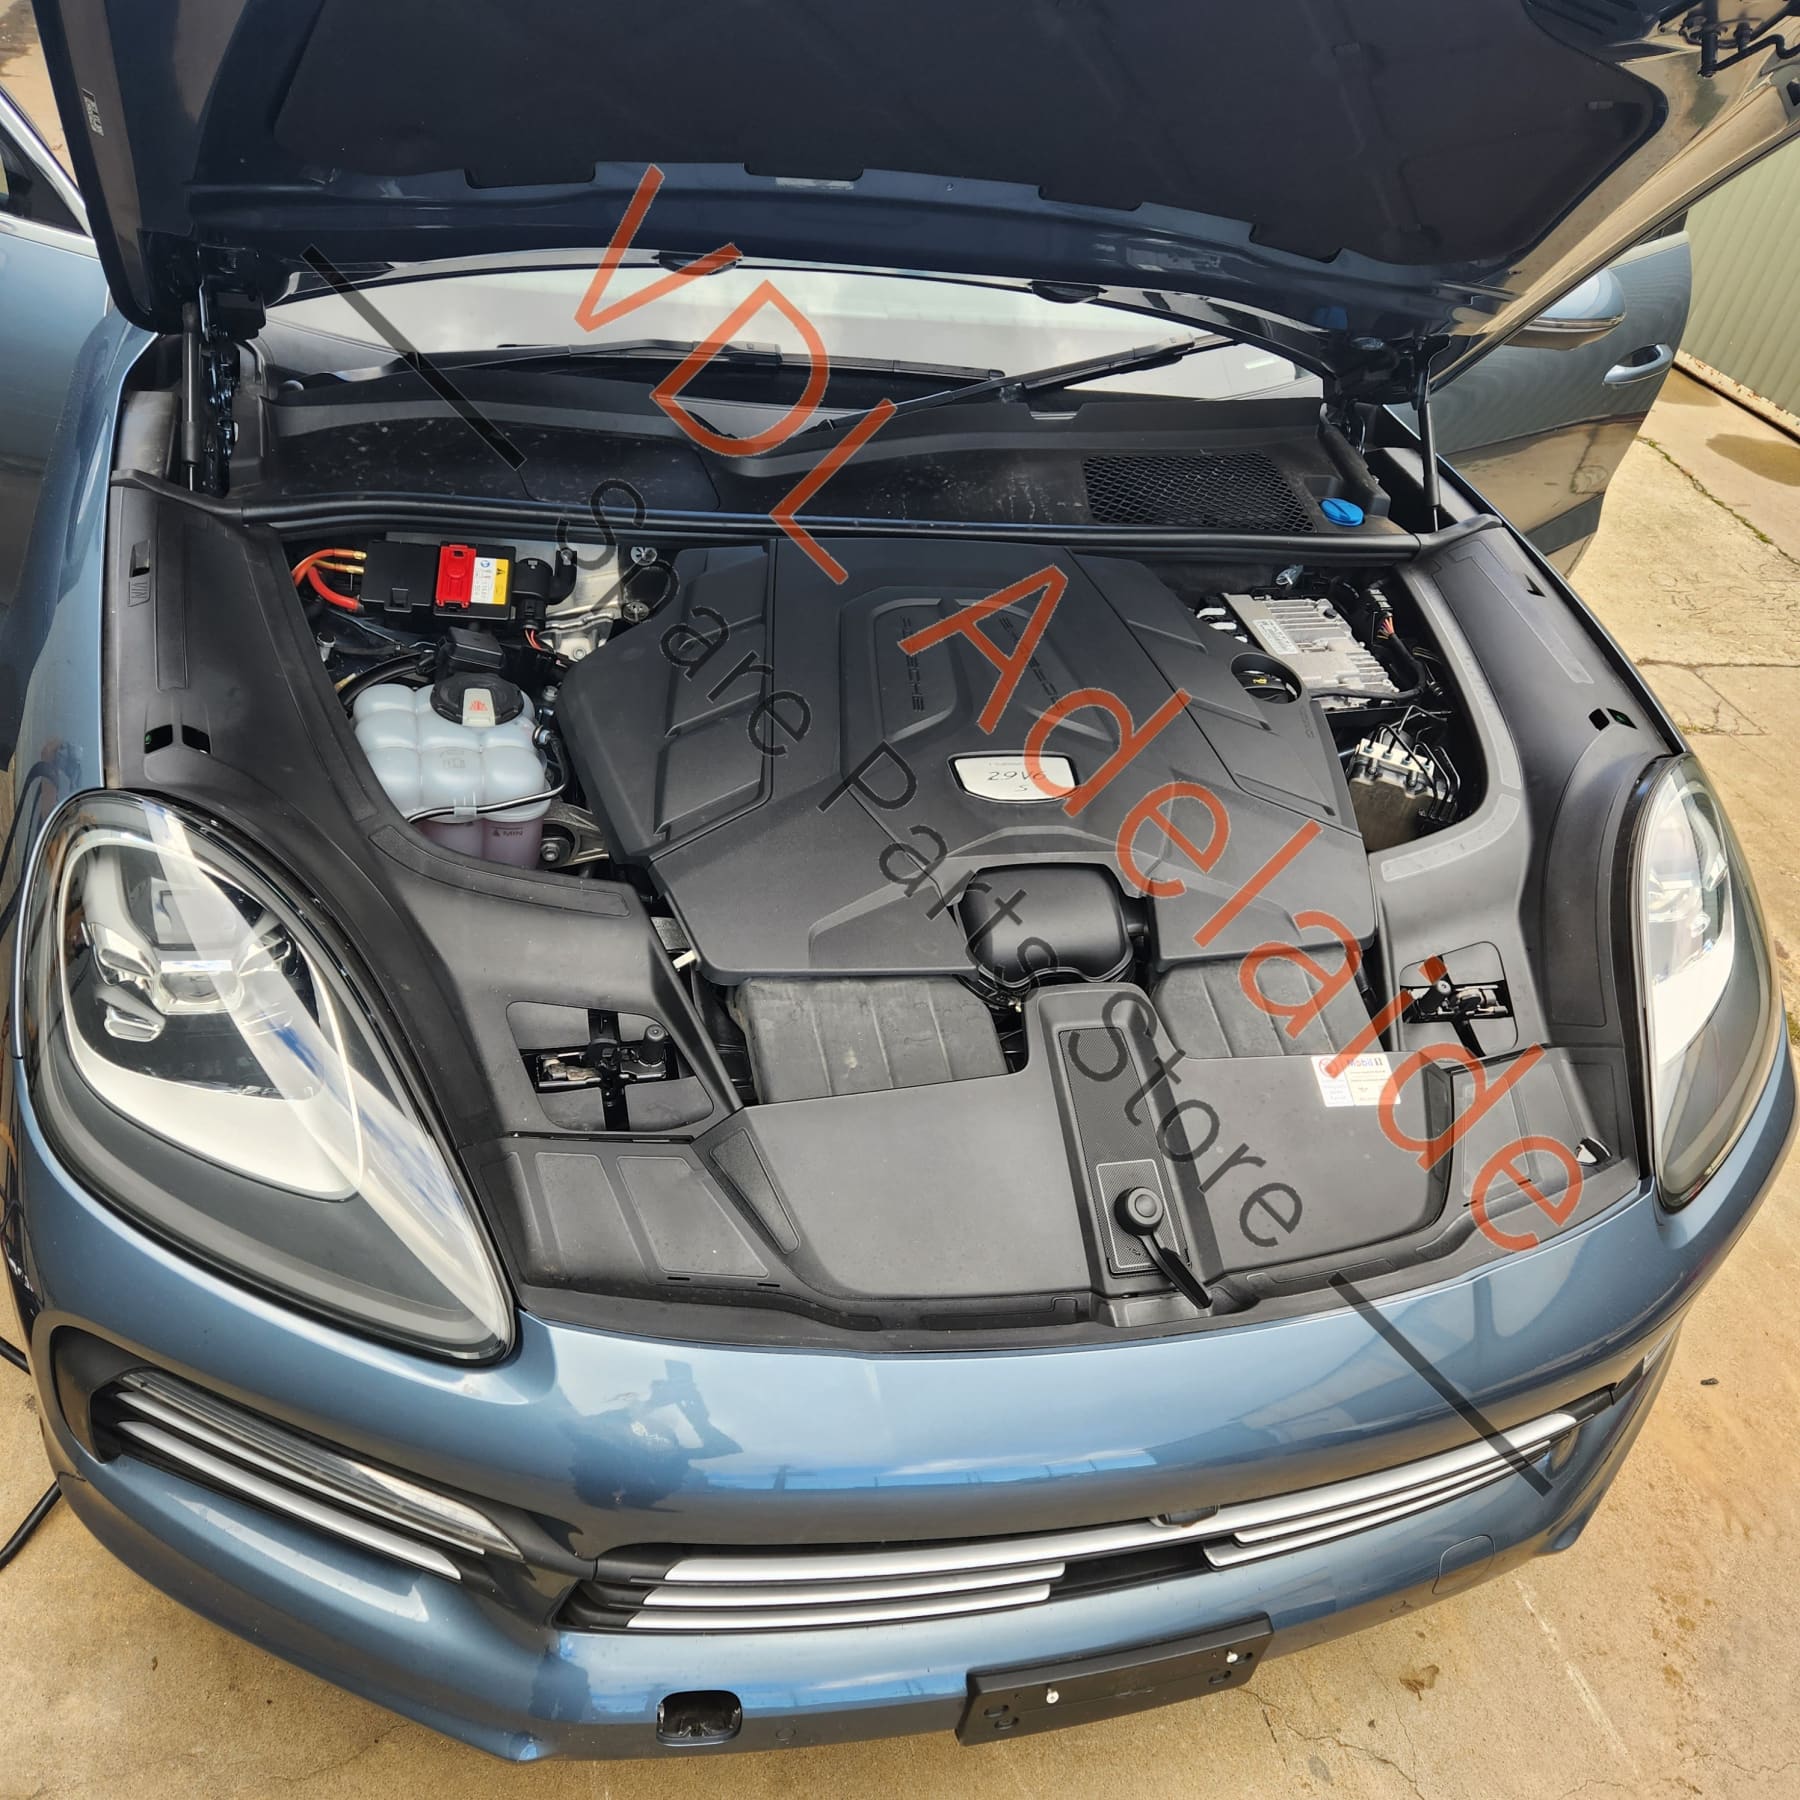 9Y0971071B 9Y0971071C   Porsche Cayenne E3 Front Left Engine Bay Wiring Harness Loom Cable Part Section 9Y0971071B & 9Y0971071C